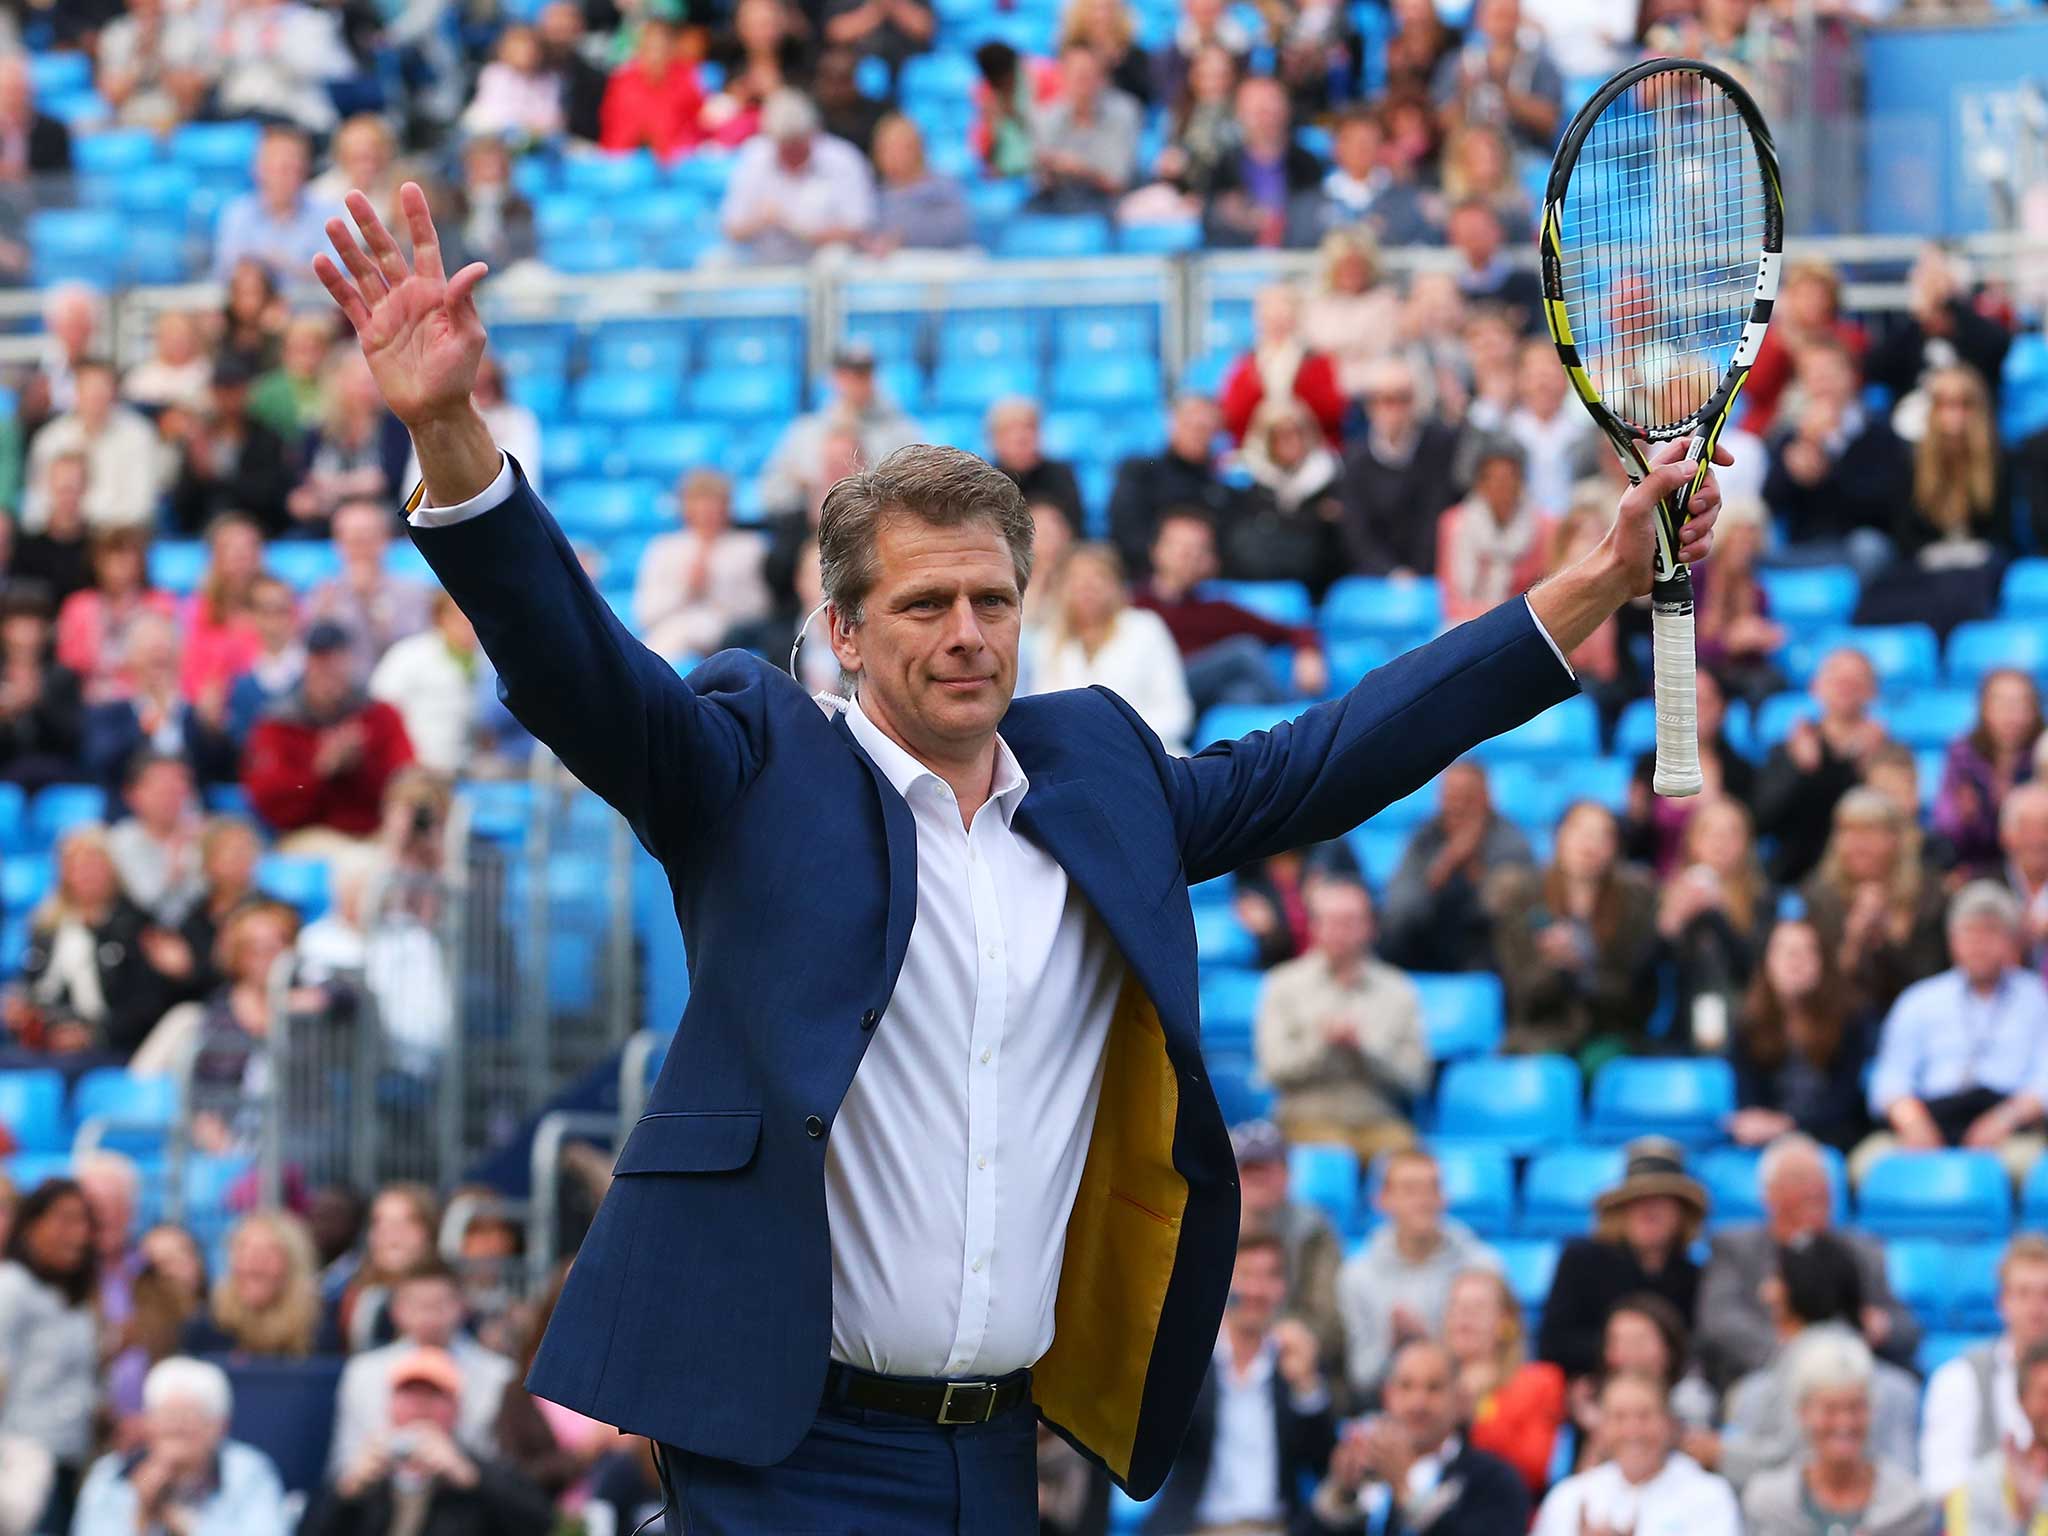 Wimbledon Andrew Castle makes lecherous remark about Marcus Willis girlfriend during BBC coverage The Independent The Independent